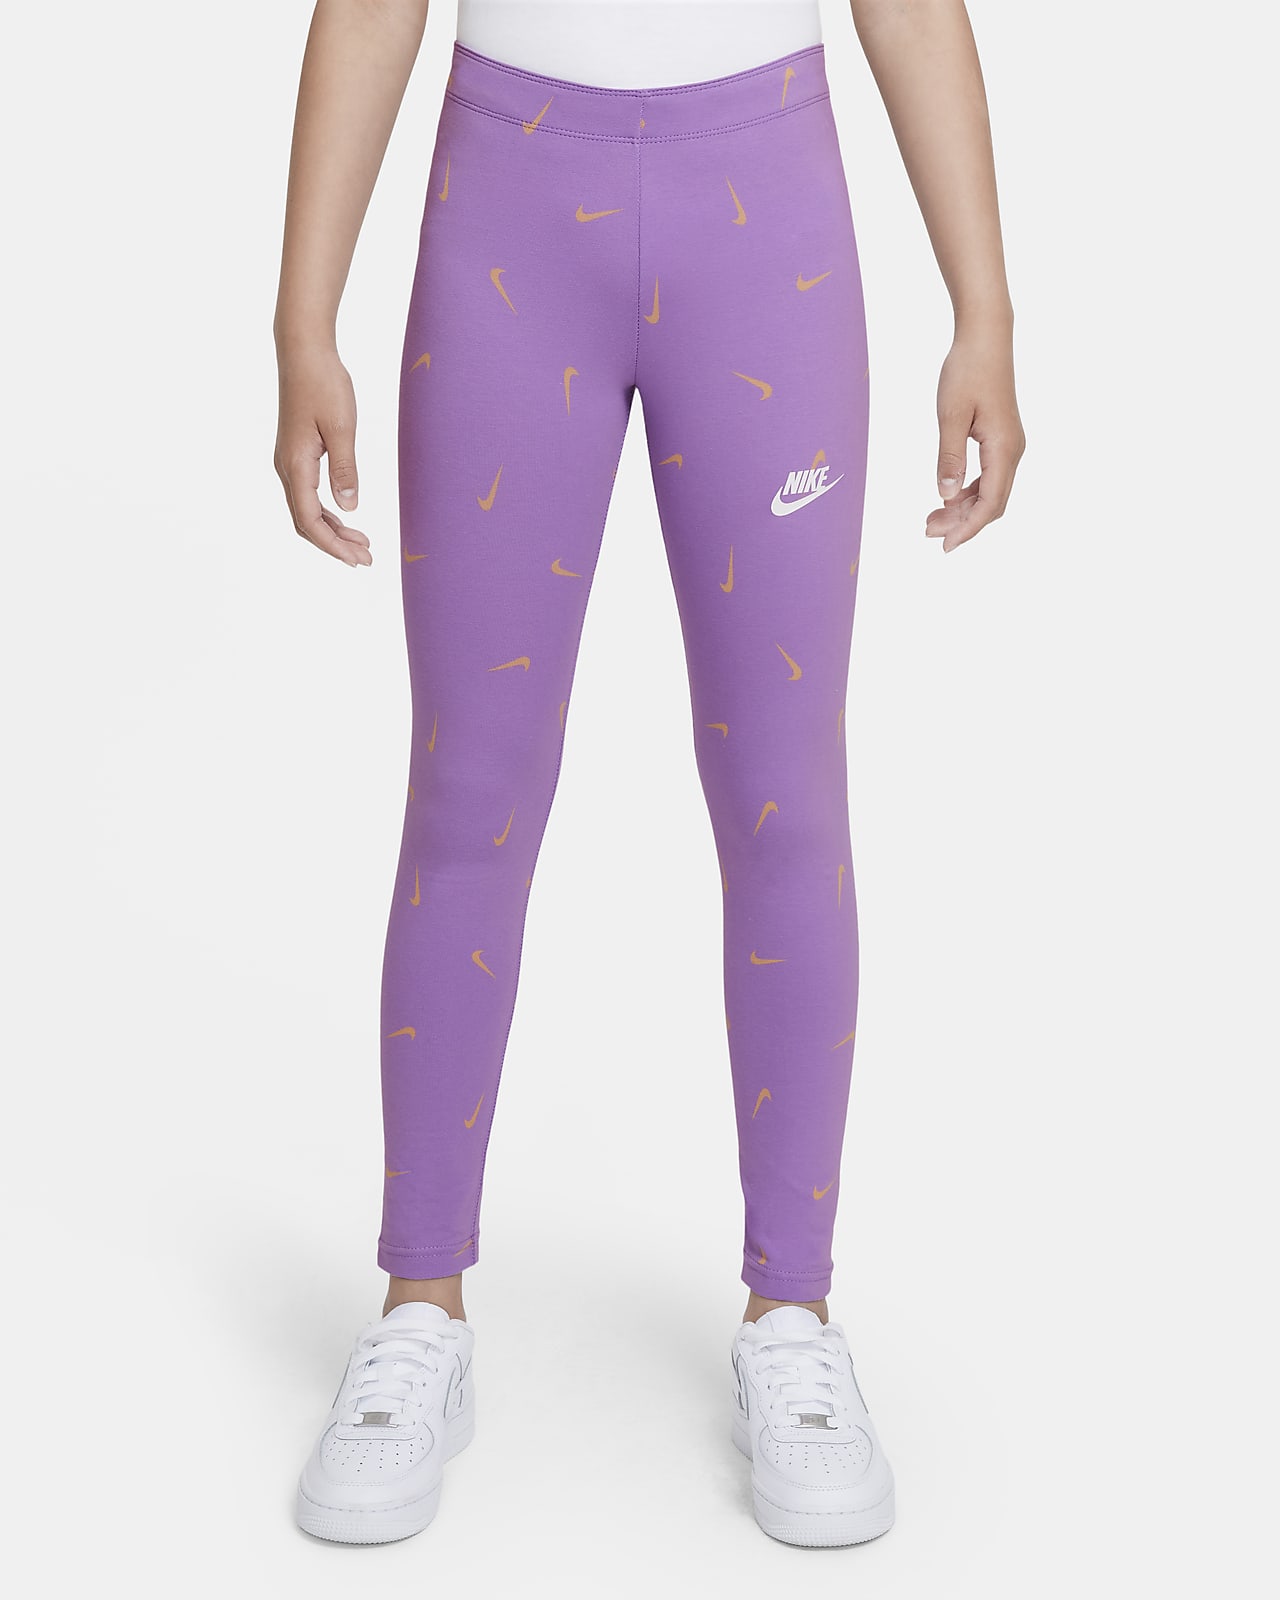 Volleyball Sportswear Leggings Clothing, sports girl, purple, physical  Fitness, violet png